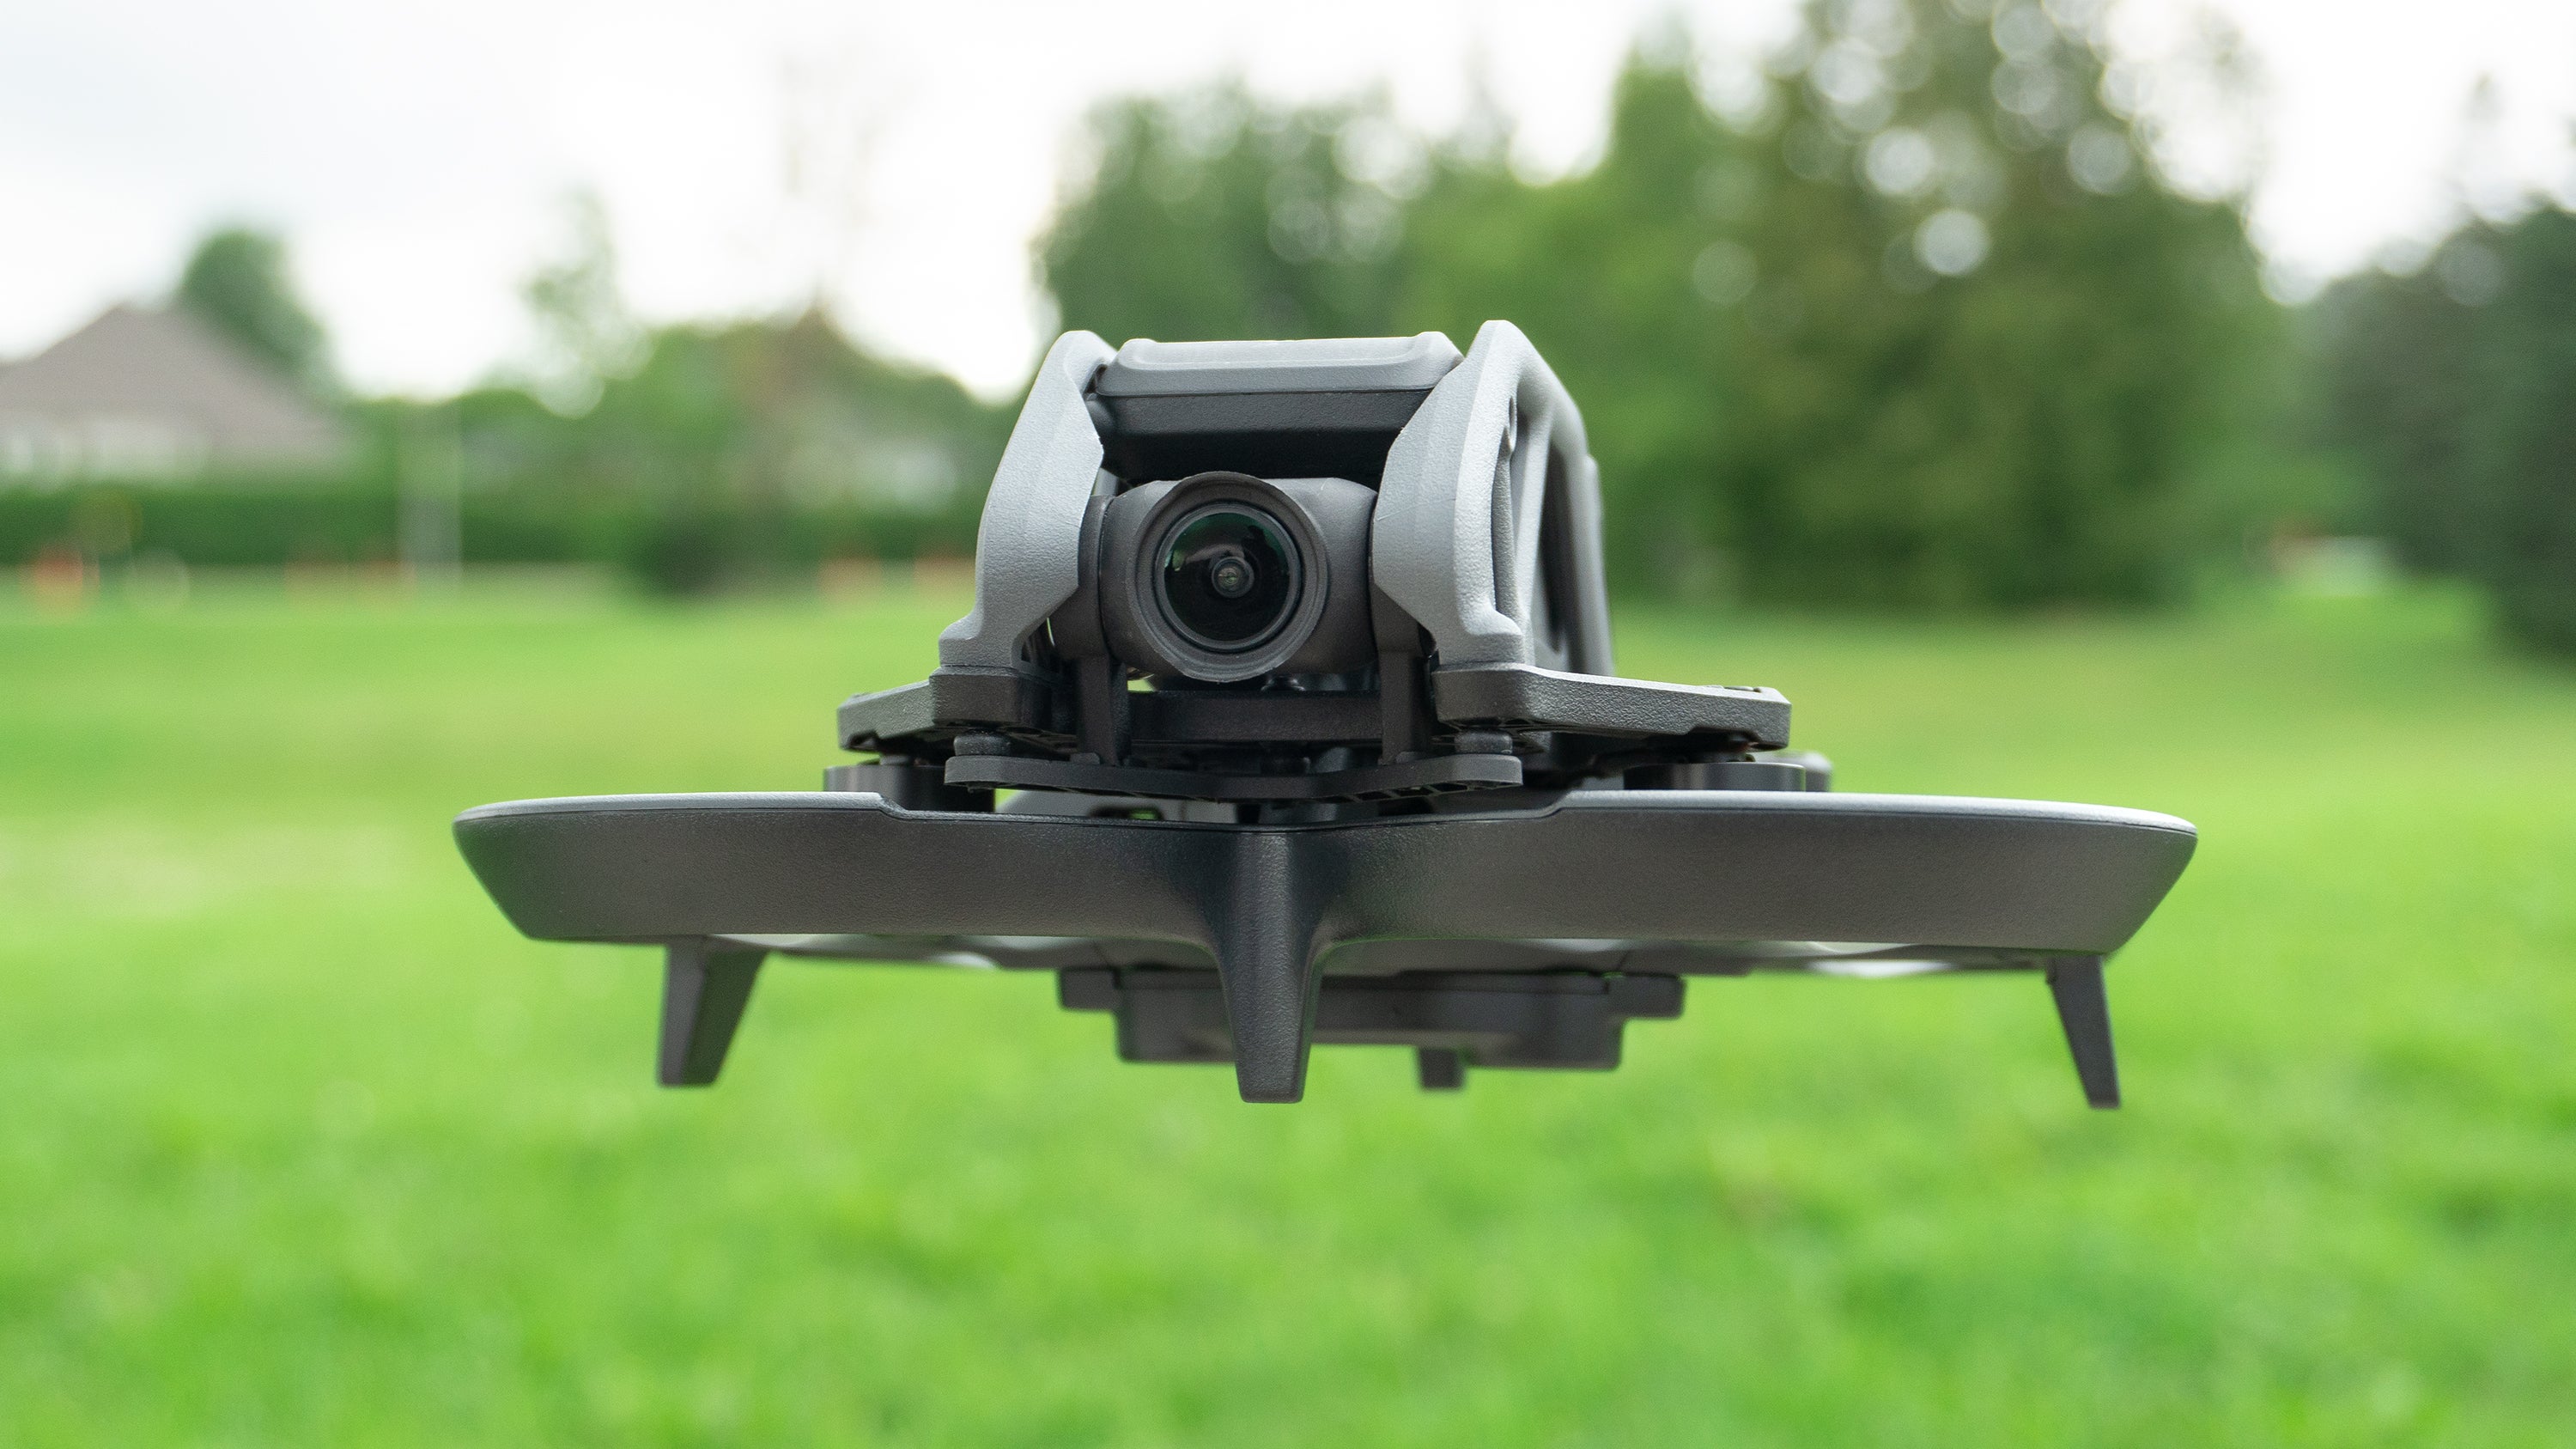 Unlike DJI's drones built specifically for content creation, the DJI Avata's camera is only mounted to a one-axis gimbal, so stabilisation is limited. (Photo: Andrew Liszewski | Gizmodo)